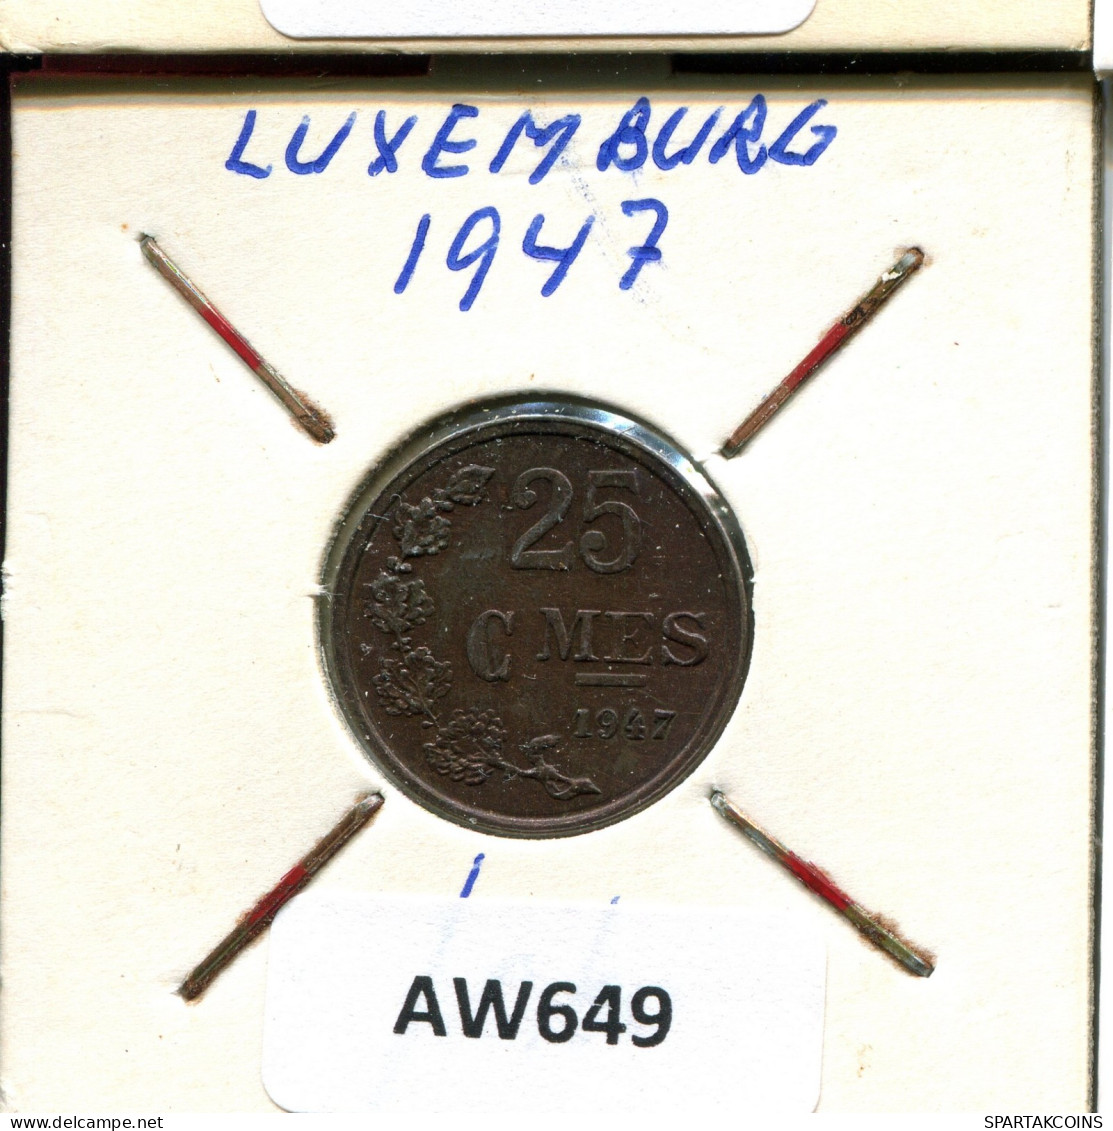 25 CENTIMES 1947 LUXEMBURGO LUXEMBOURG Moneda #AW649.E.A - Luxembourg